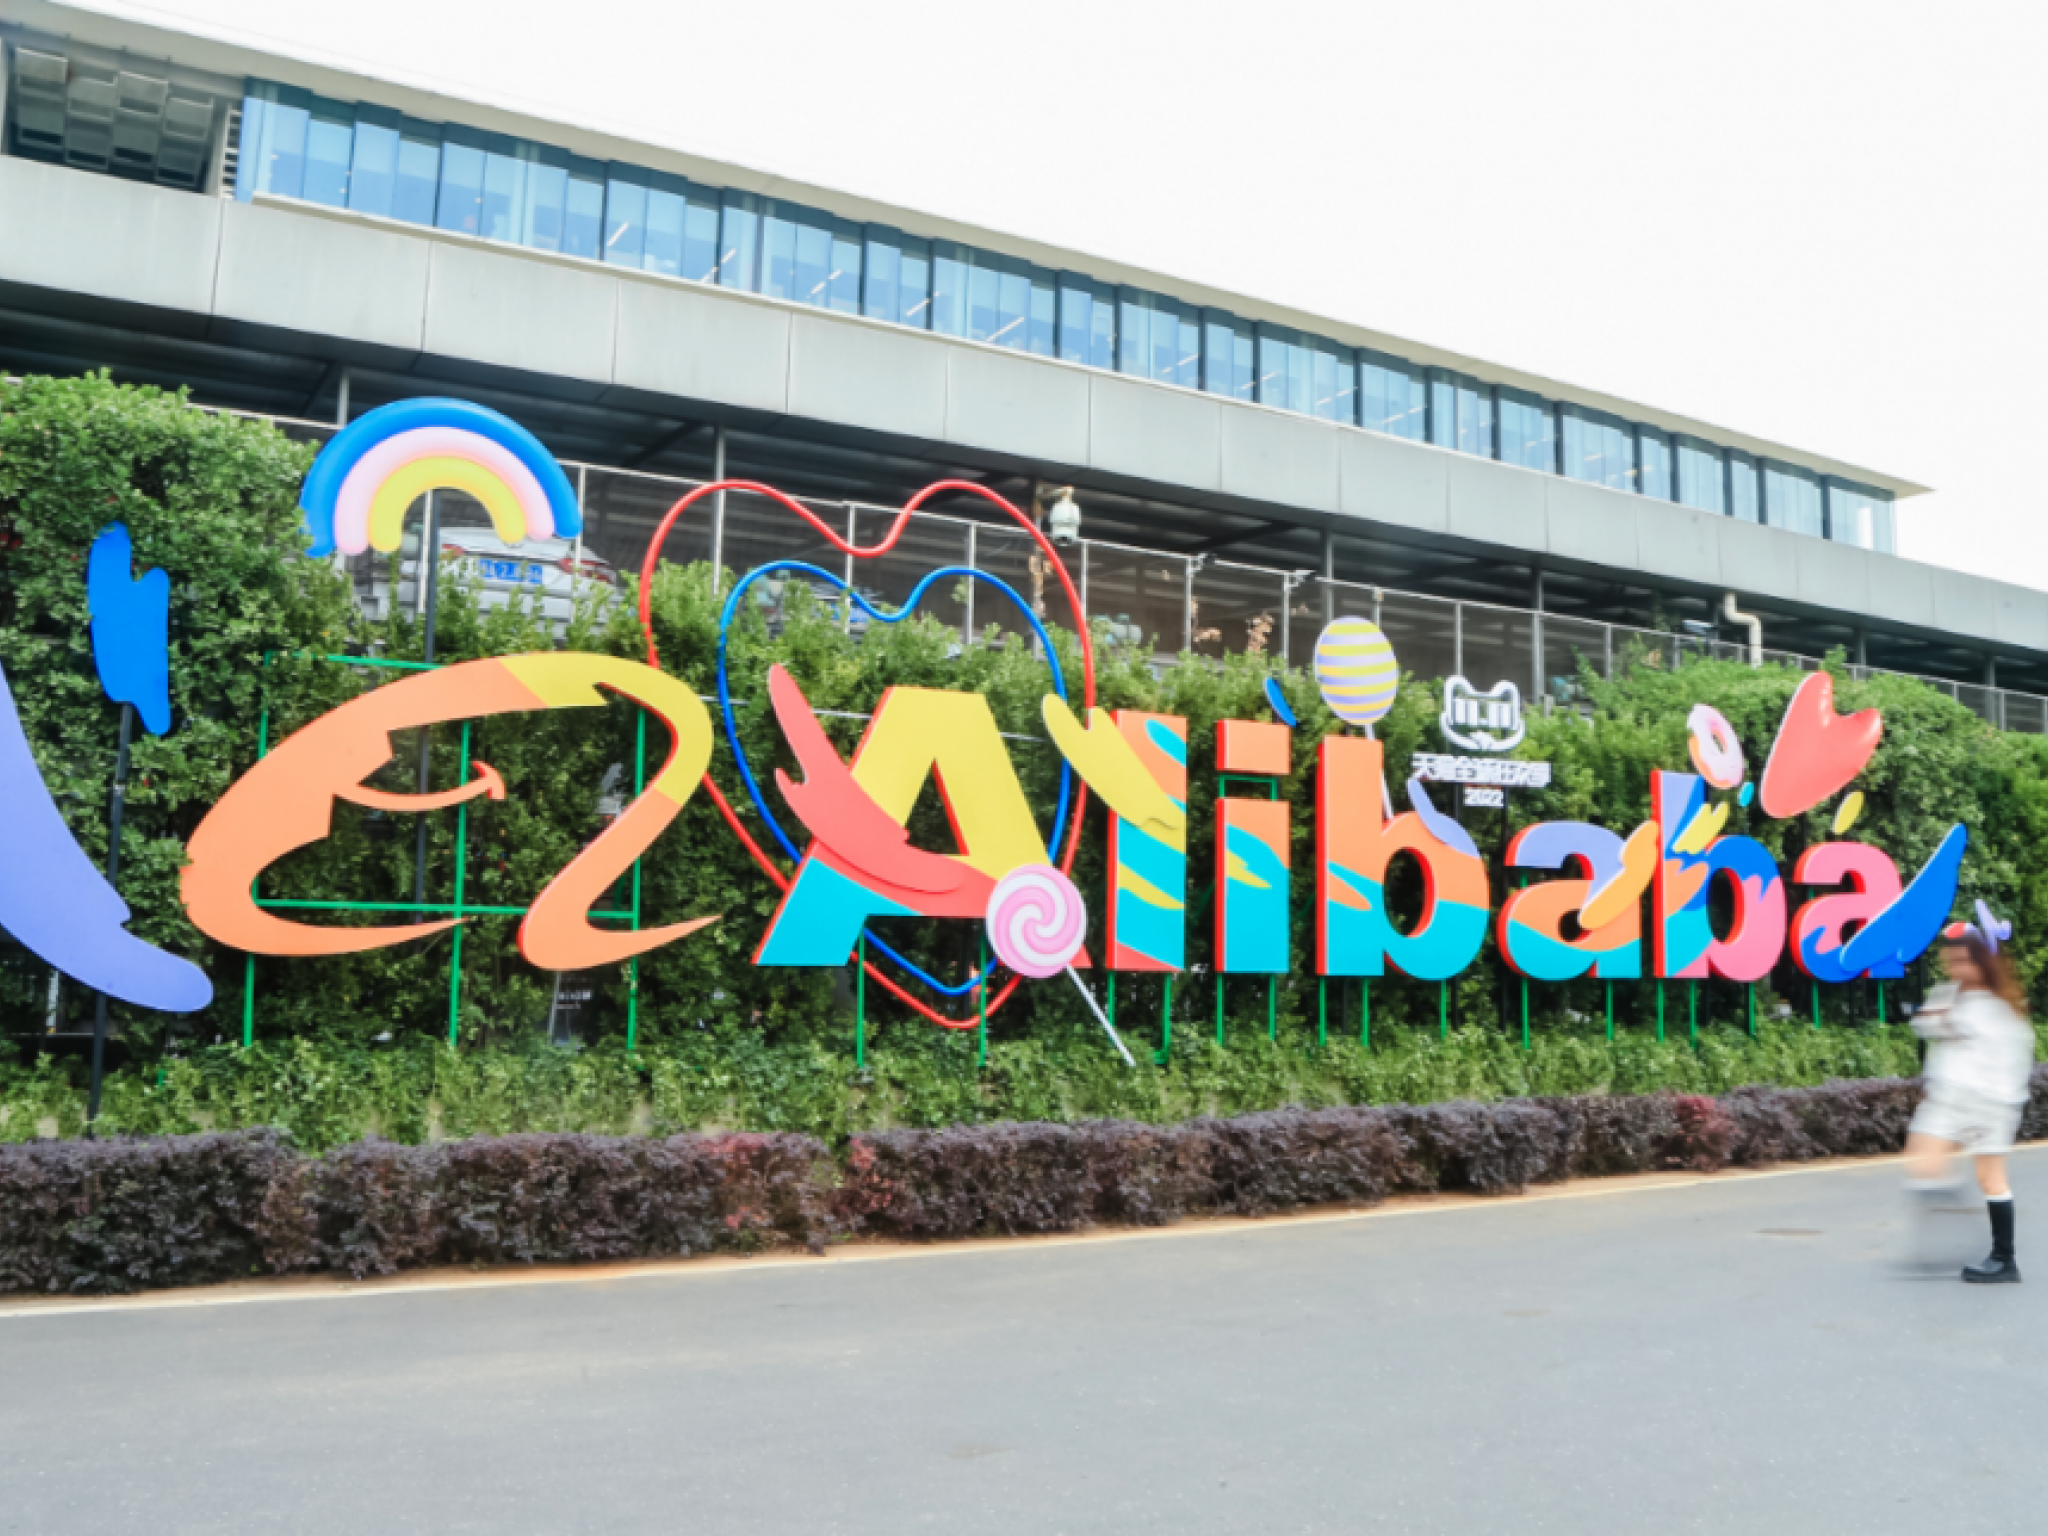  alibabas-618-shopping-festival-boosts-sales-with-big-brands-like-apple-xiaomi-leading-the-way 